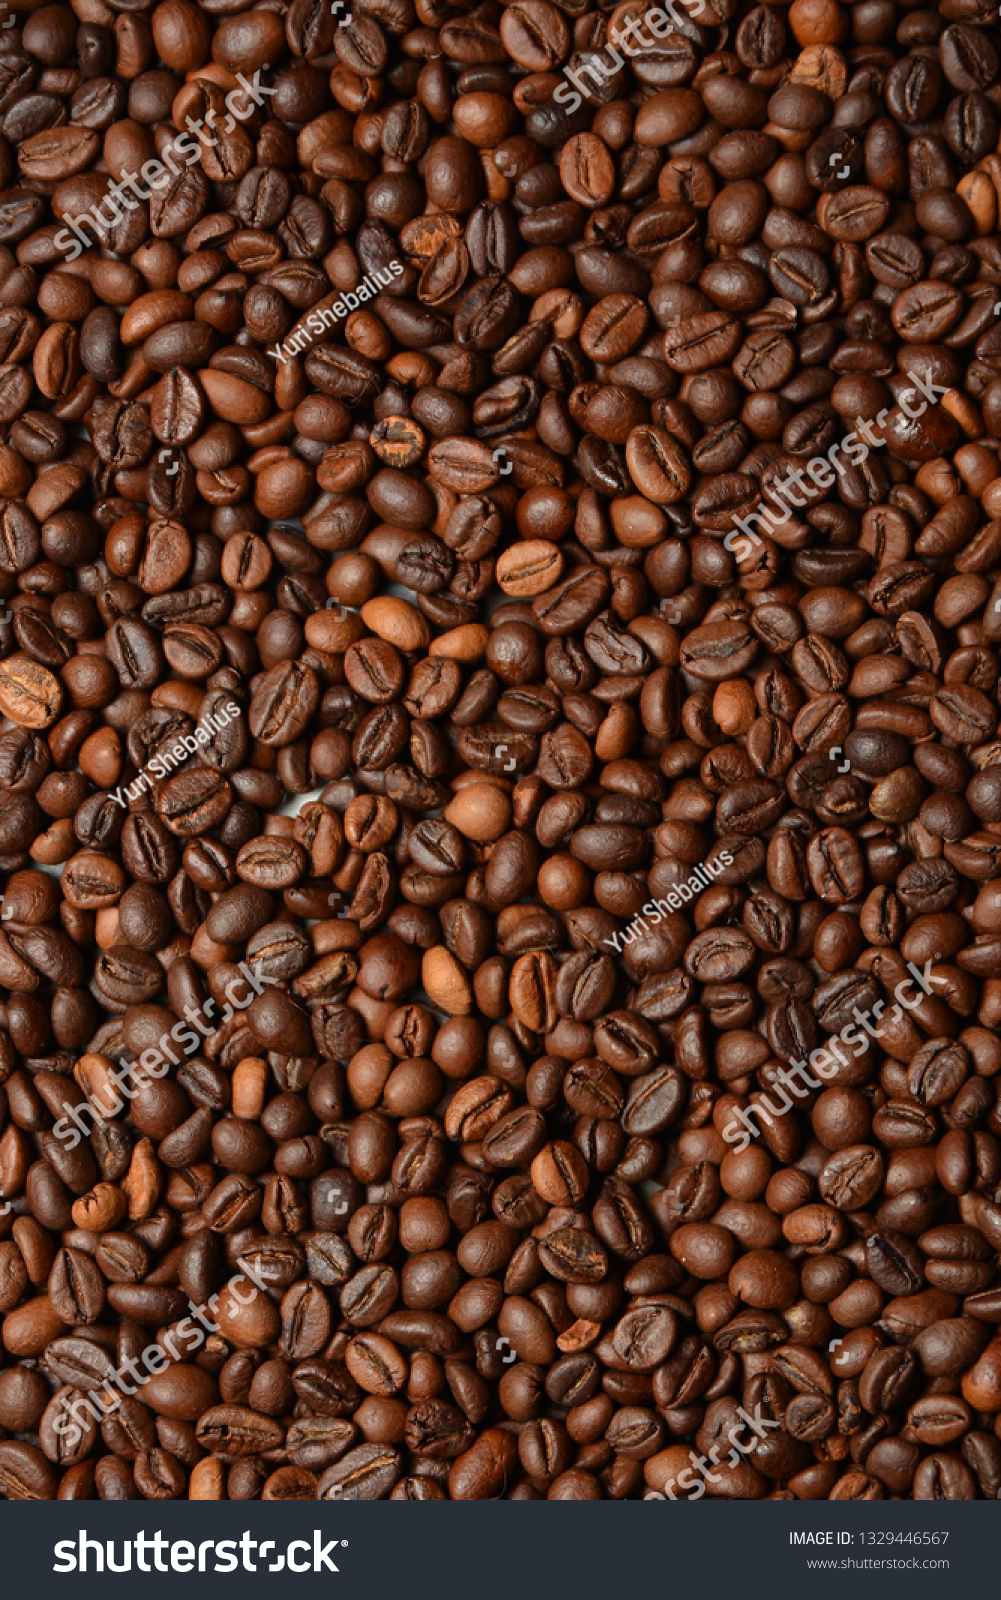 Coffee beans background #1329446567